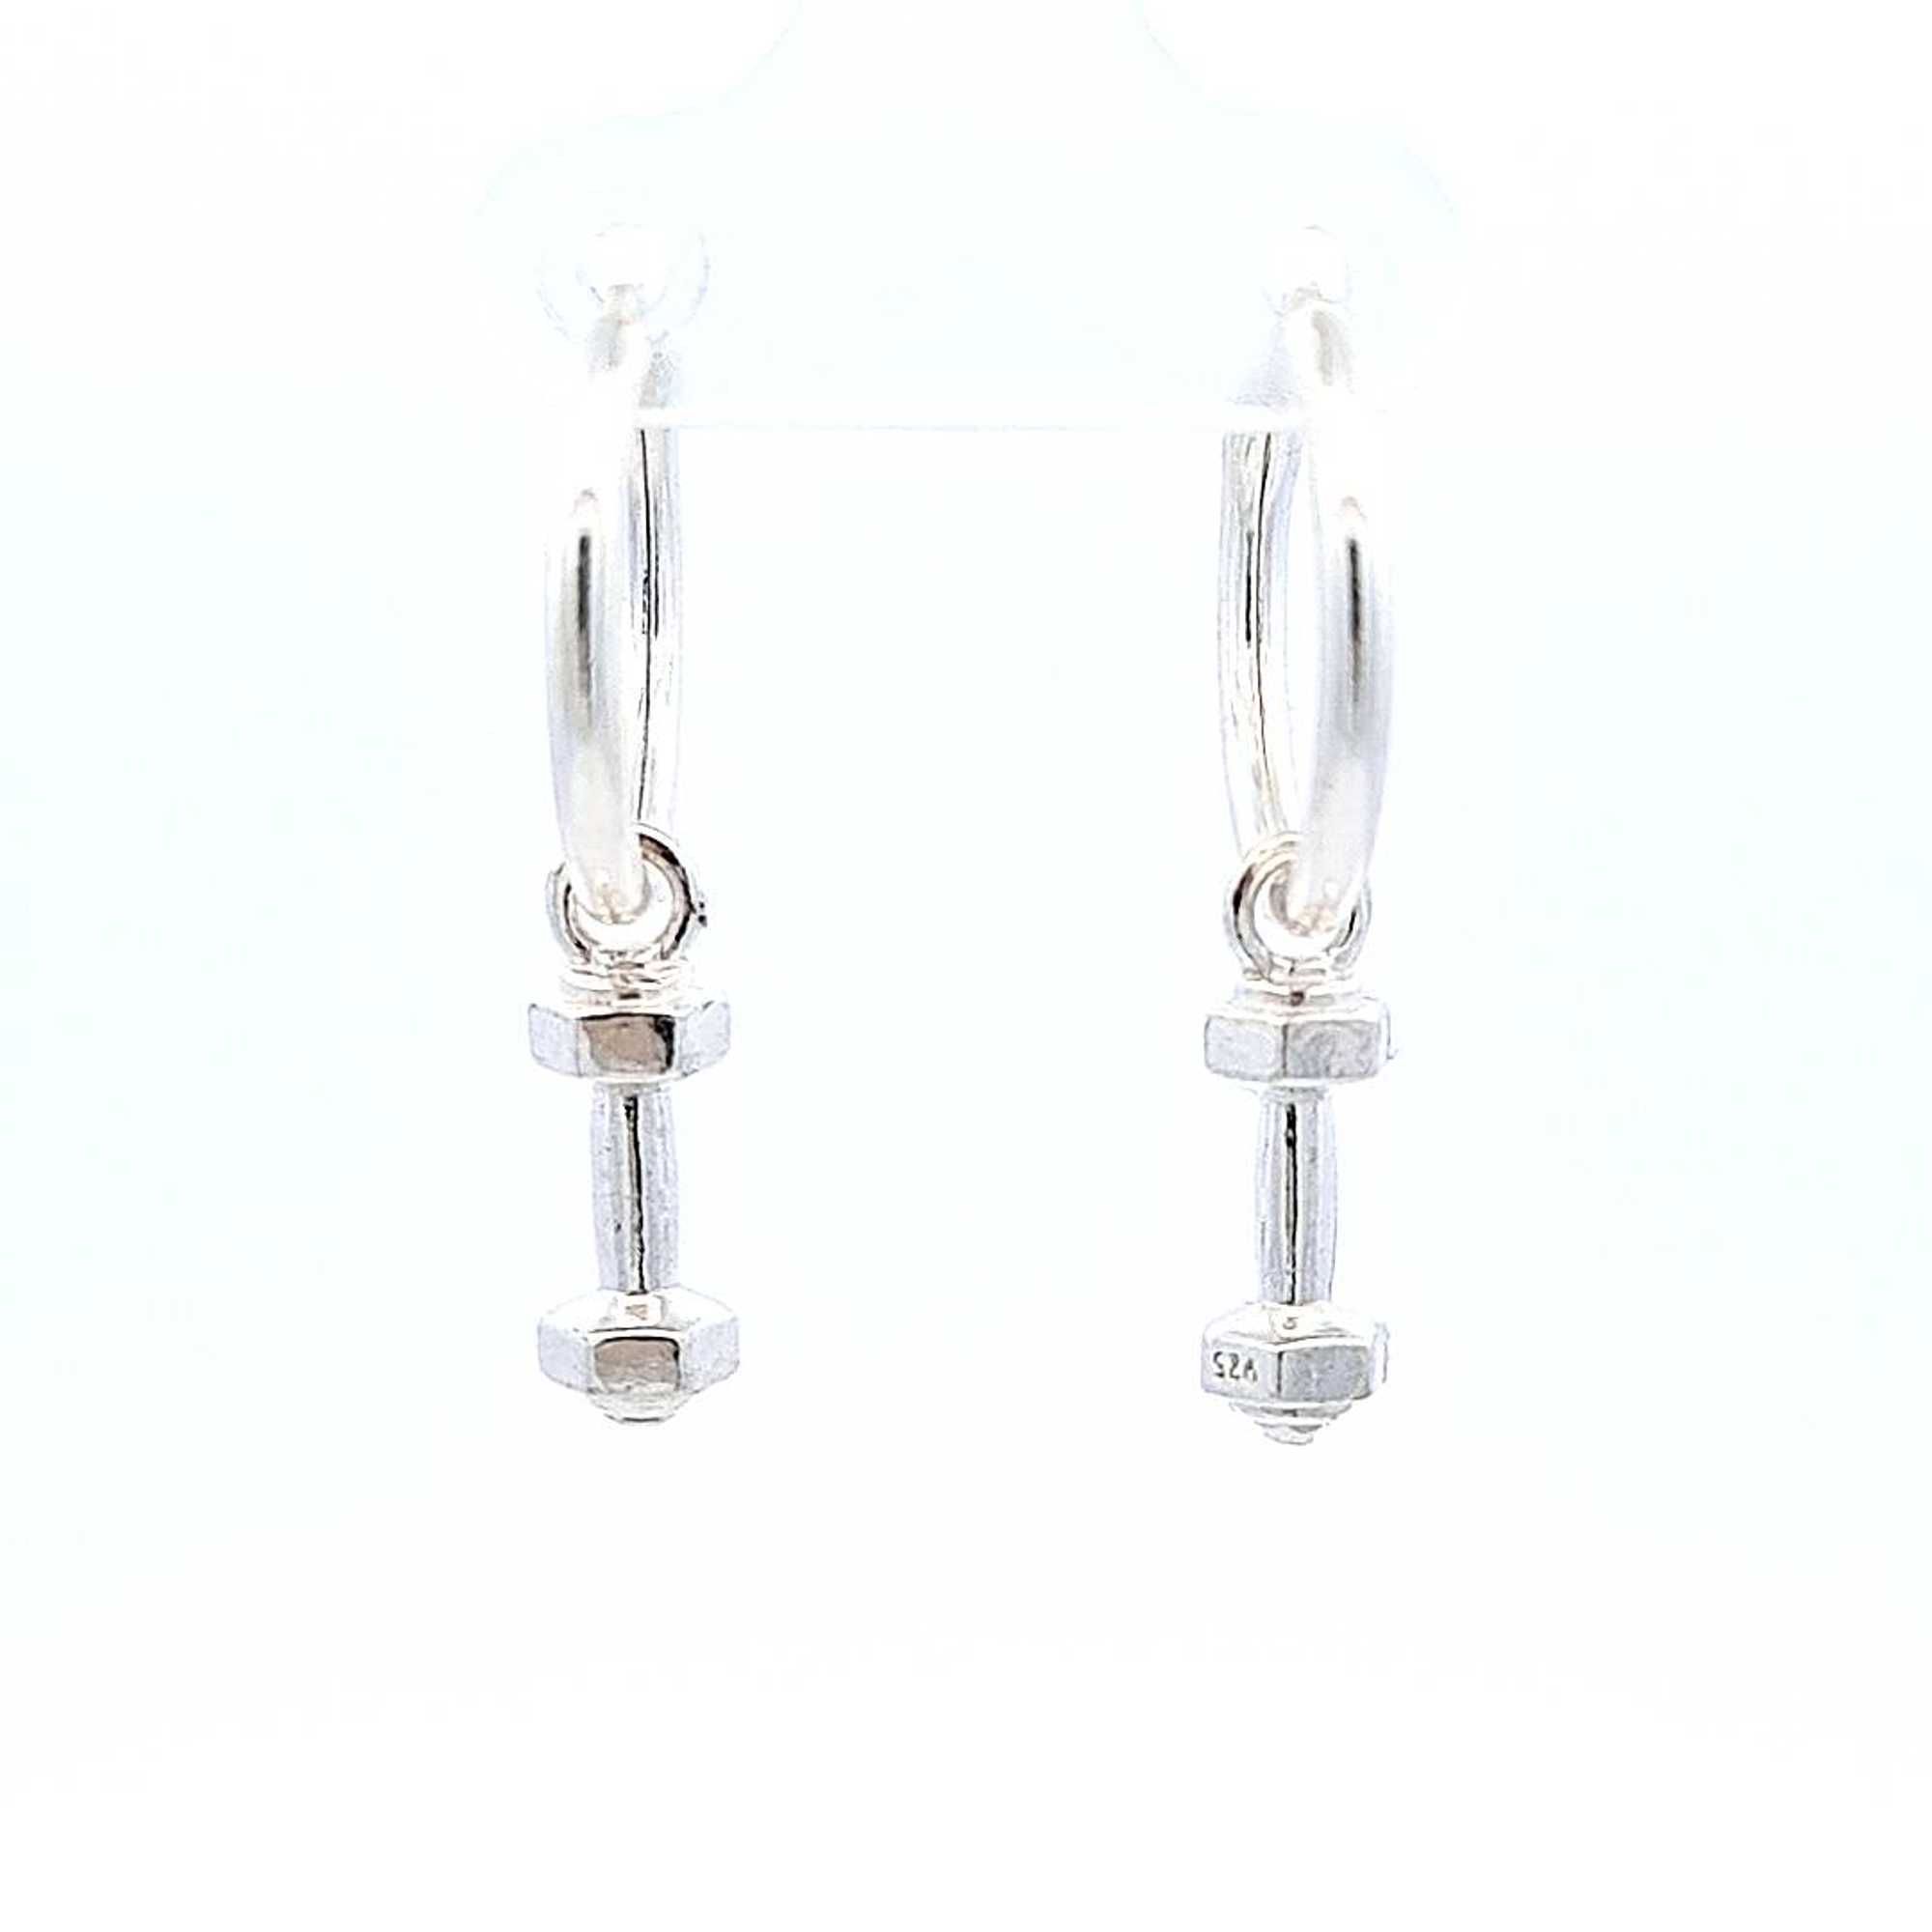 Fitness Enthusiast Dumbbell Charm Hoop Earrings in Sterling Silver